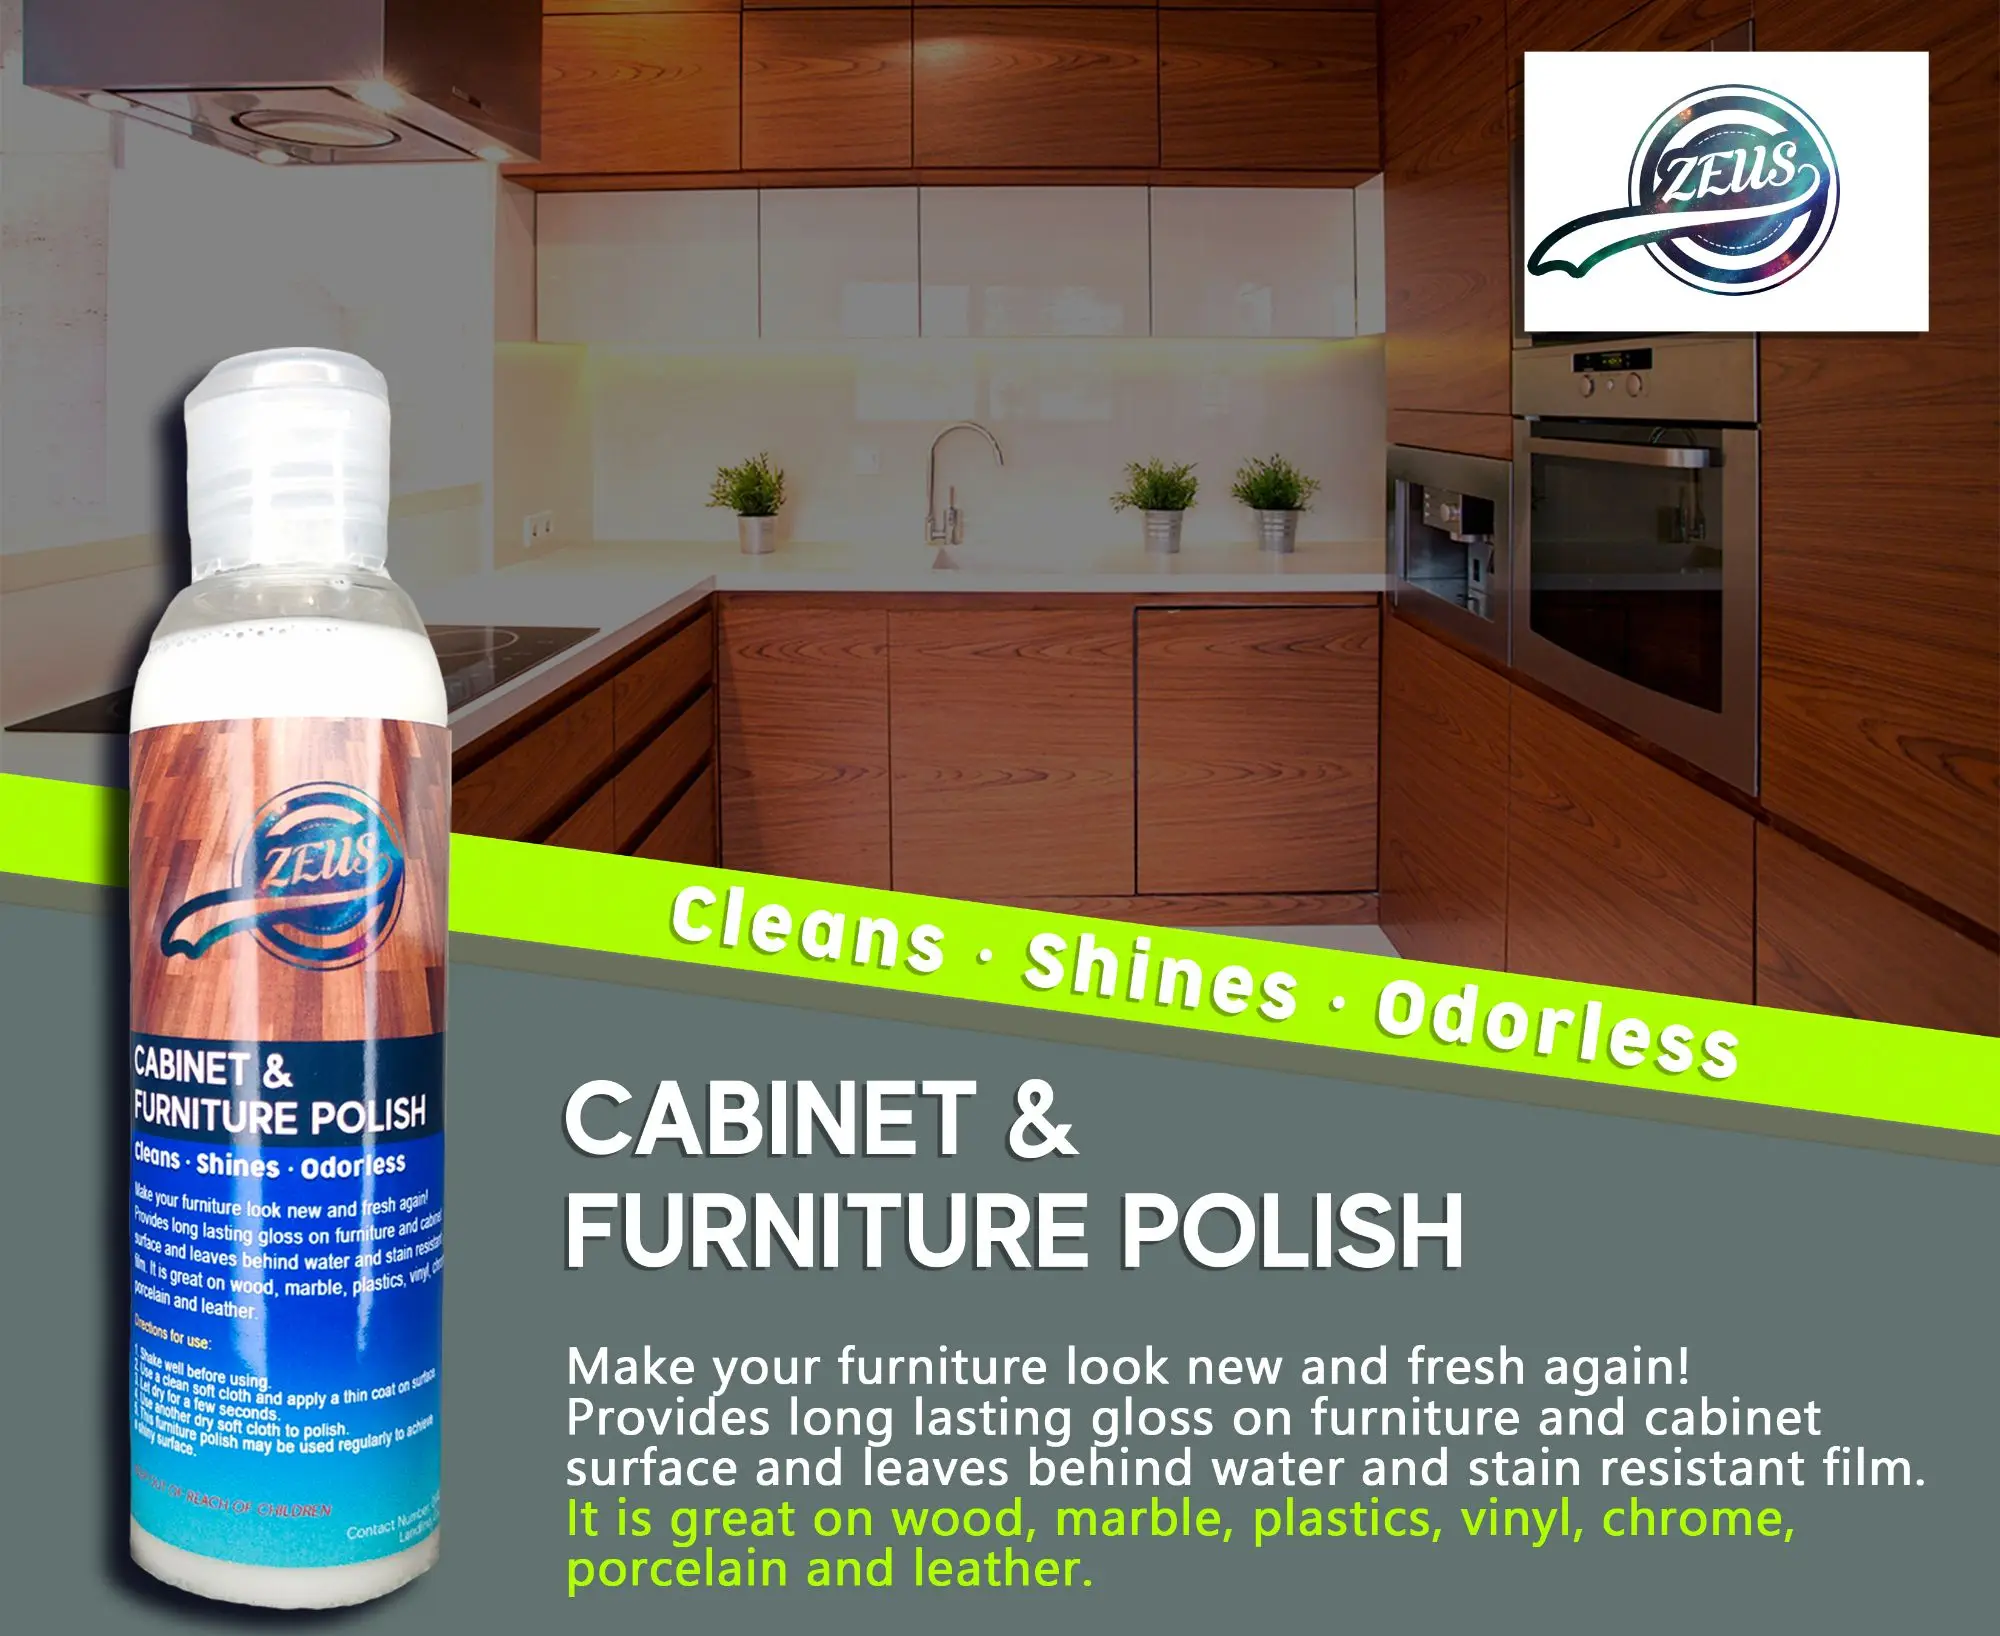 Zeus Cabinet and Furniture Polish / Cleaner 100 ml